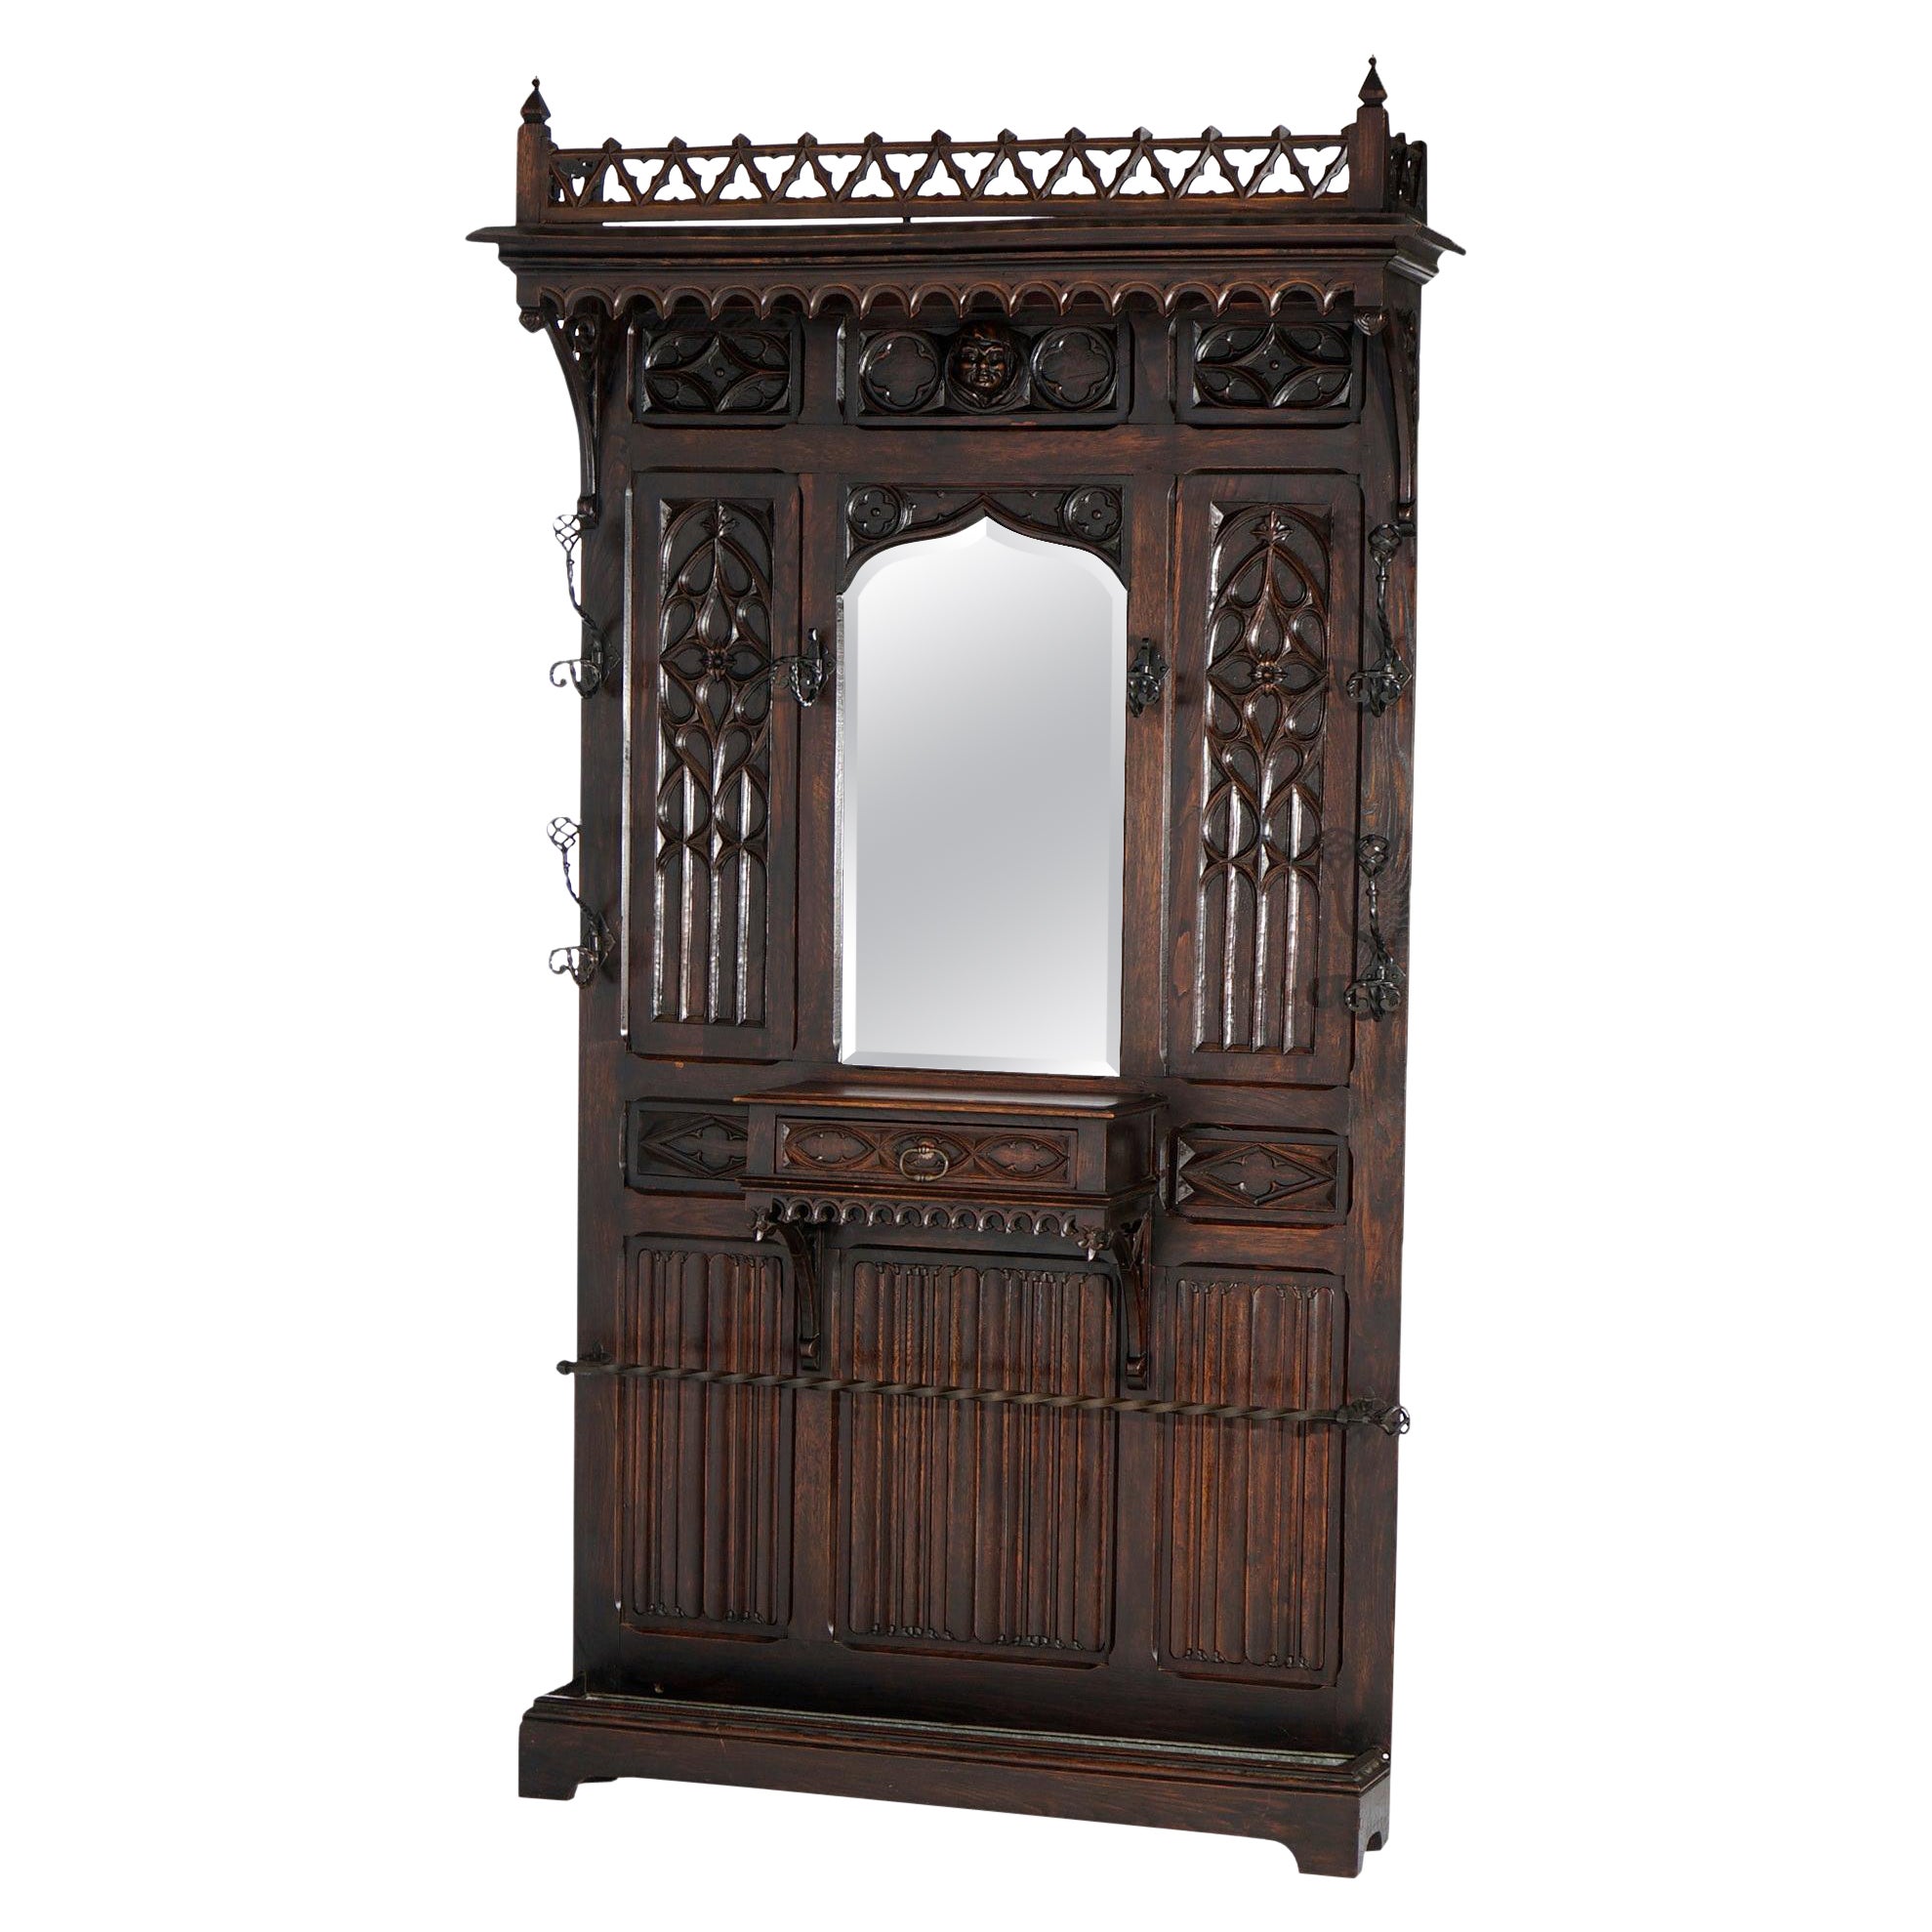 Large Antique Gothic Revival Figural Carved English Oak Hall Mirror, c1900